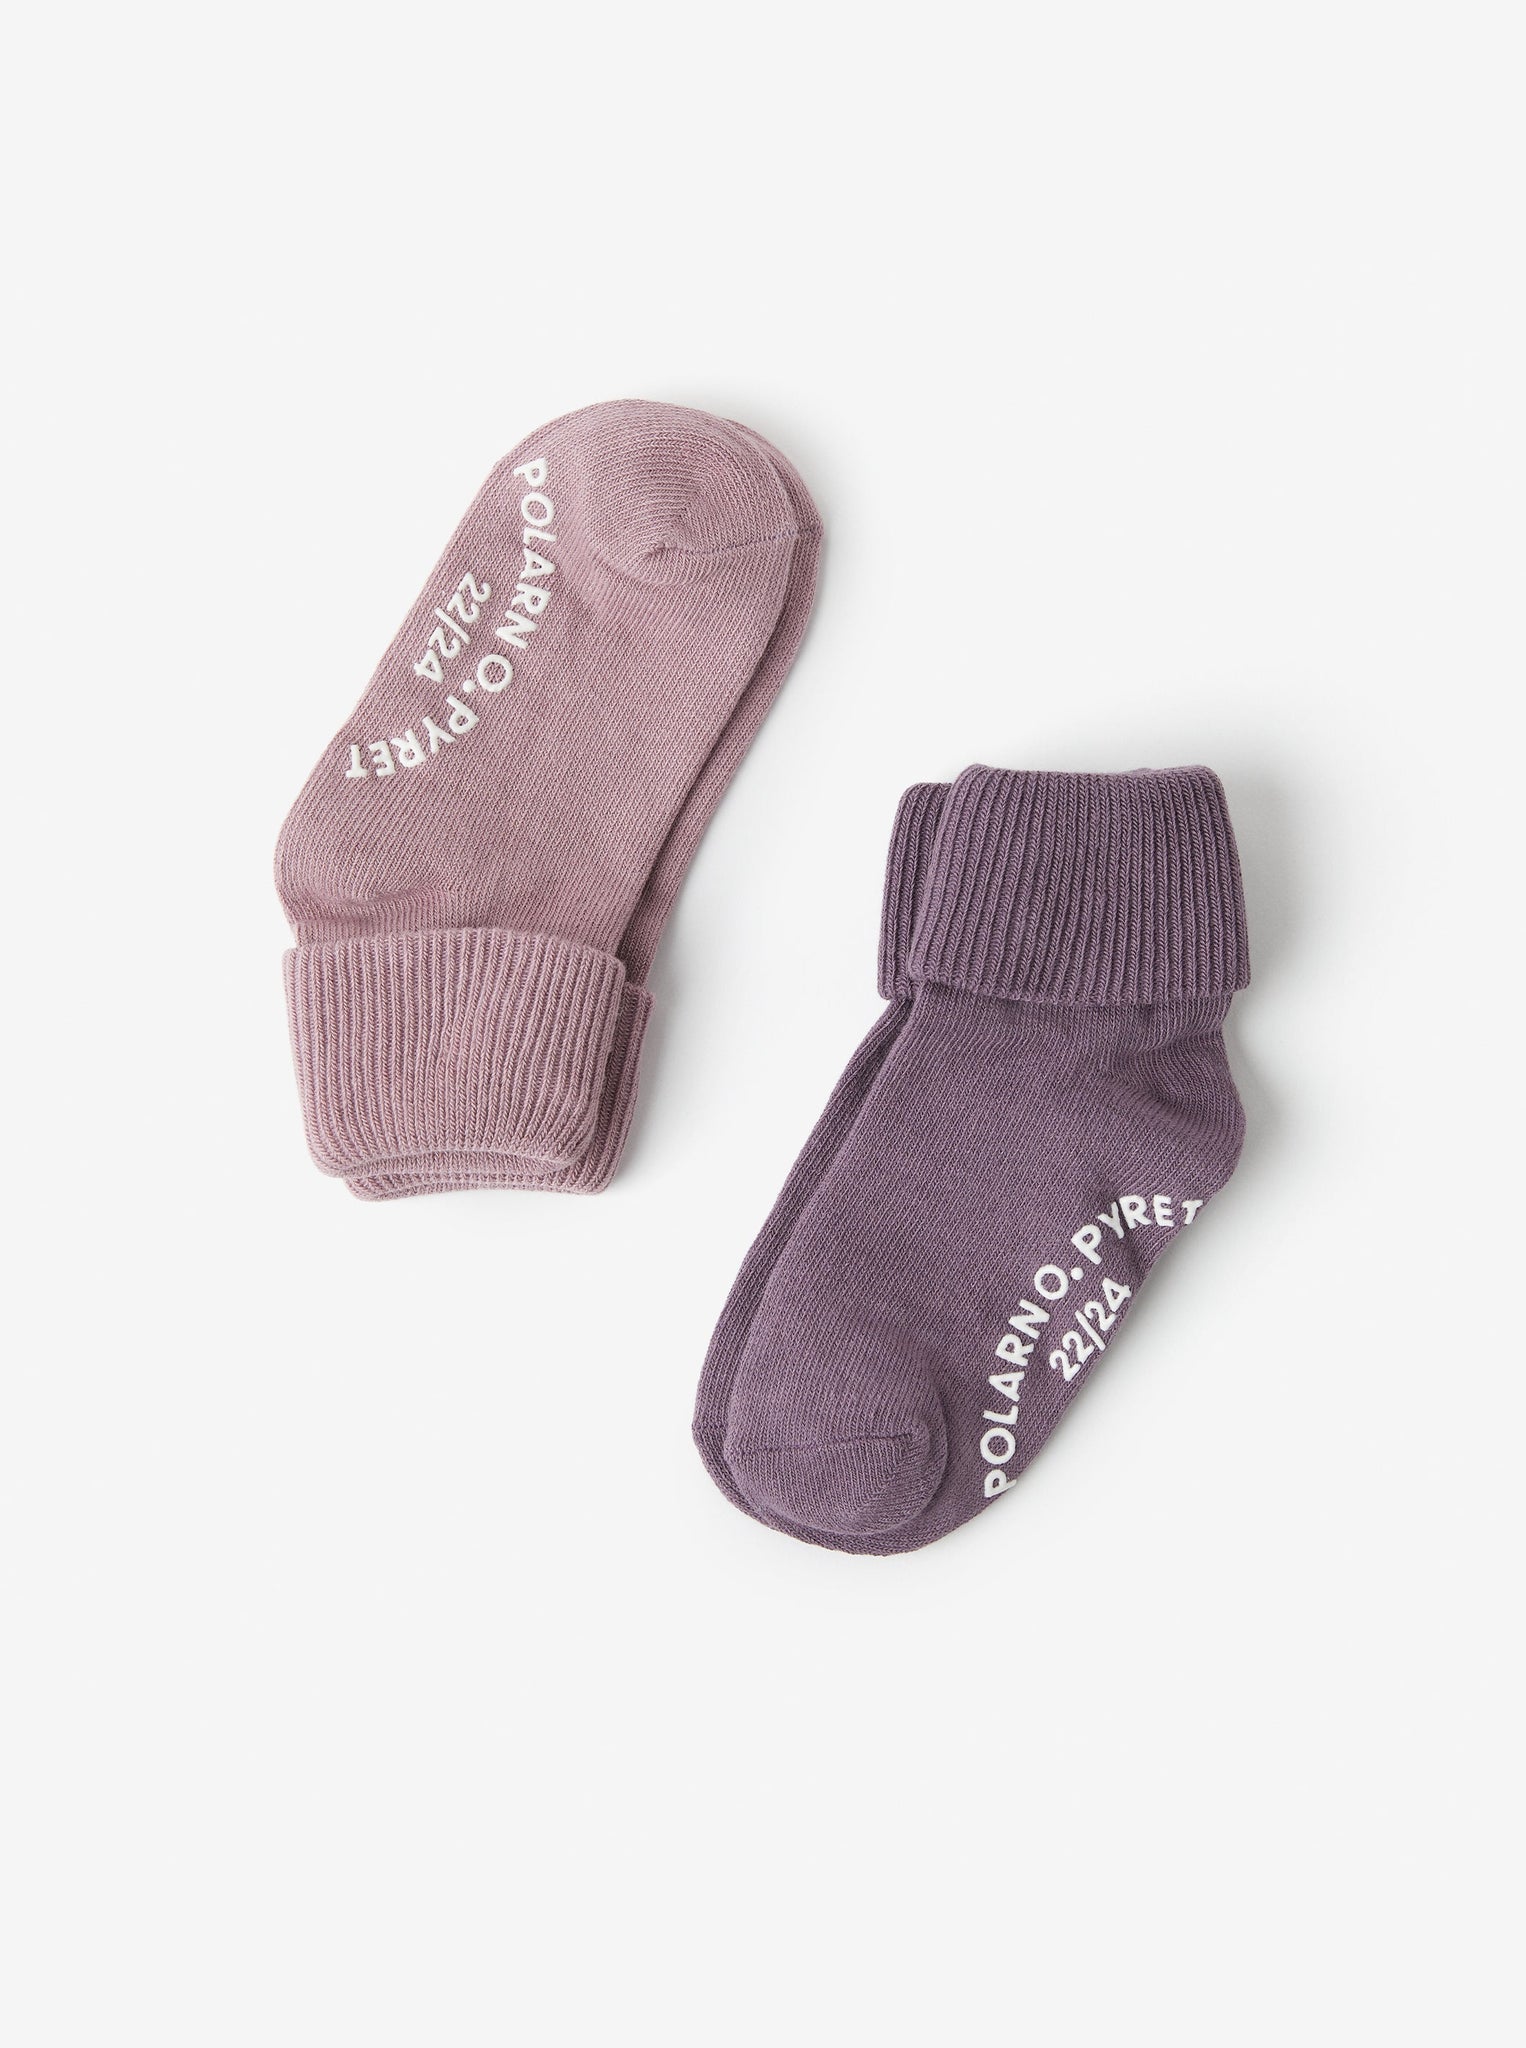 Purple Antislip Kids Socks Multipack from the Polarn O. Pyret kidswear collection. Ethically produced kids clothing.